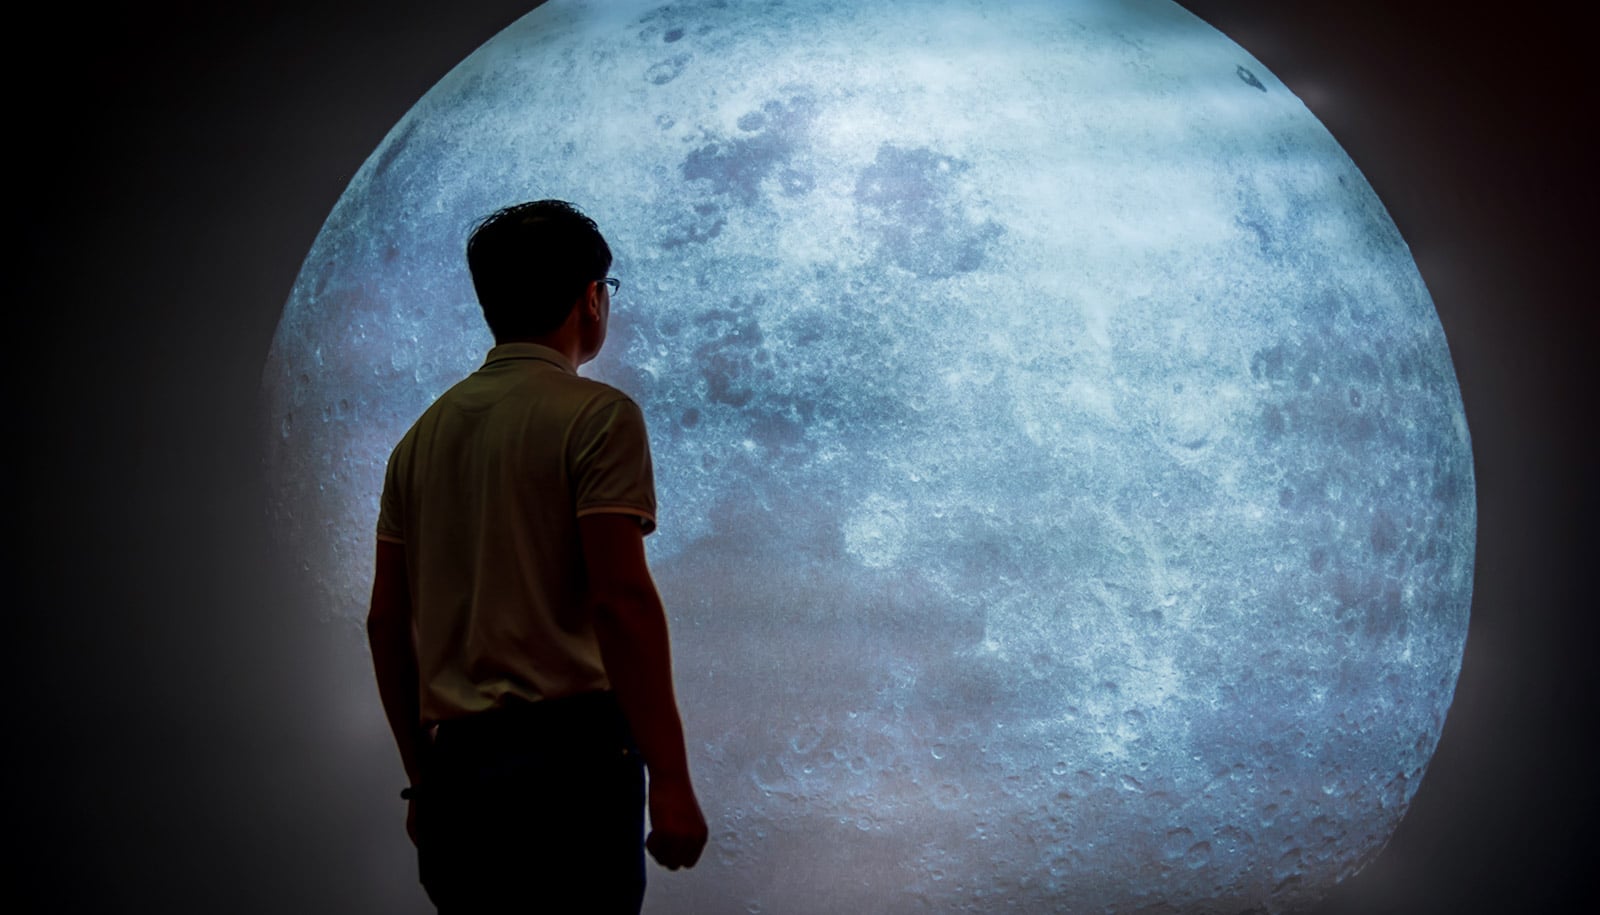 A man looks at a projection of the moon on the wall of a dark room.